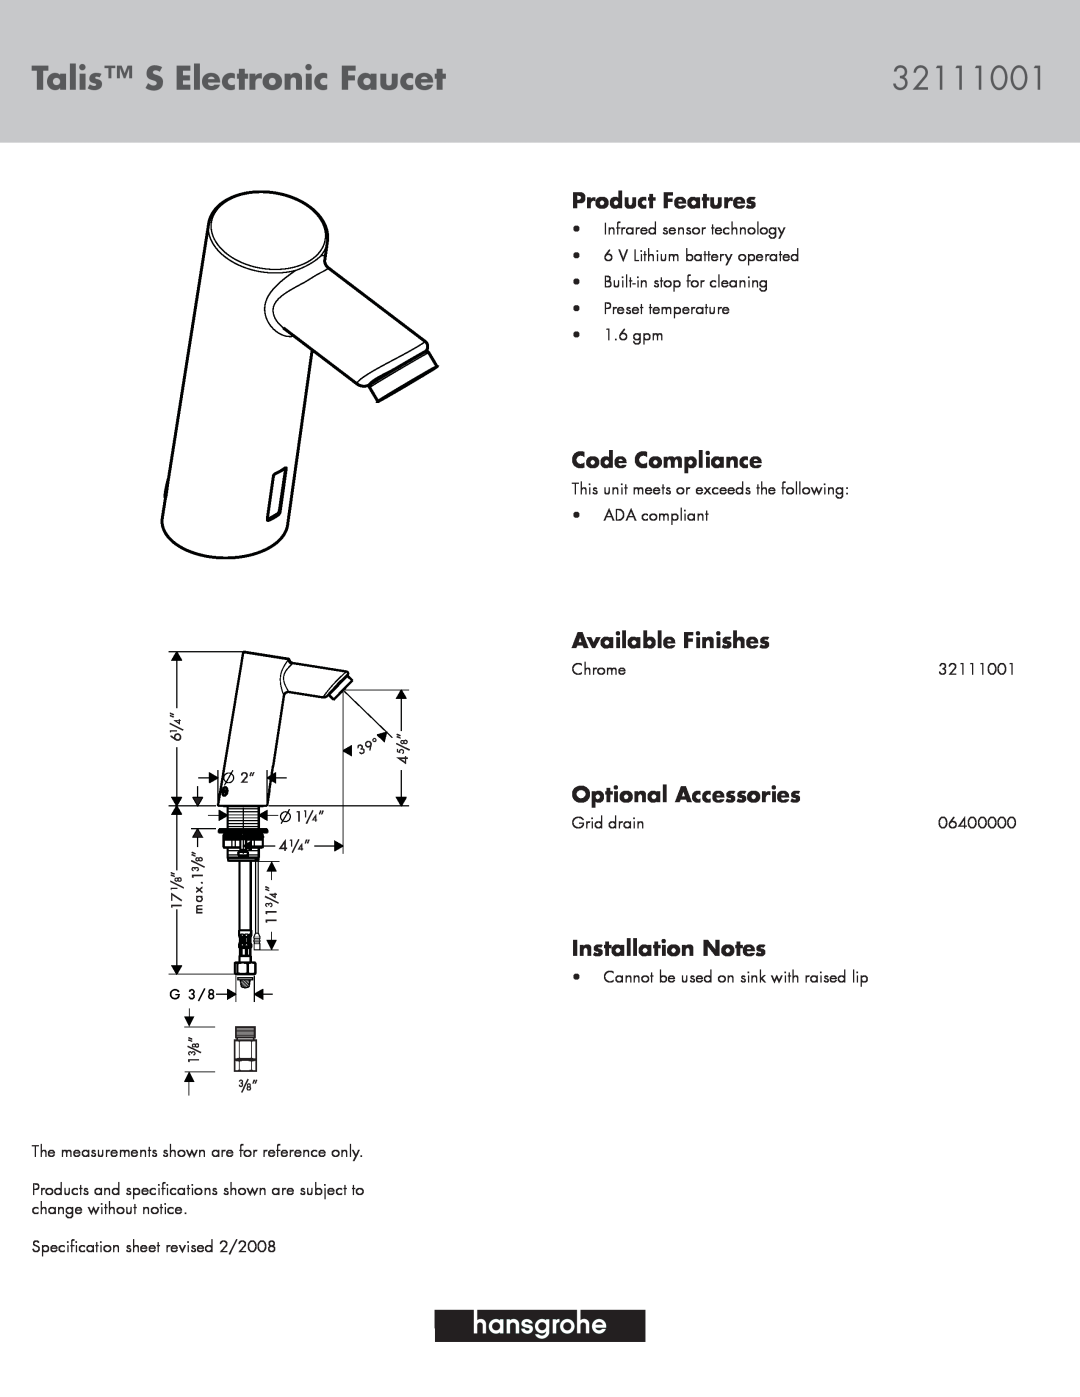 Hans Grohe 32111001 specifications Talis S Electronic Faucet, Product Features, Code Compliance, Available Finishes 